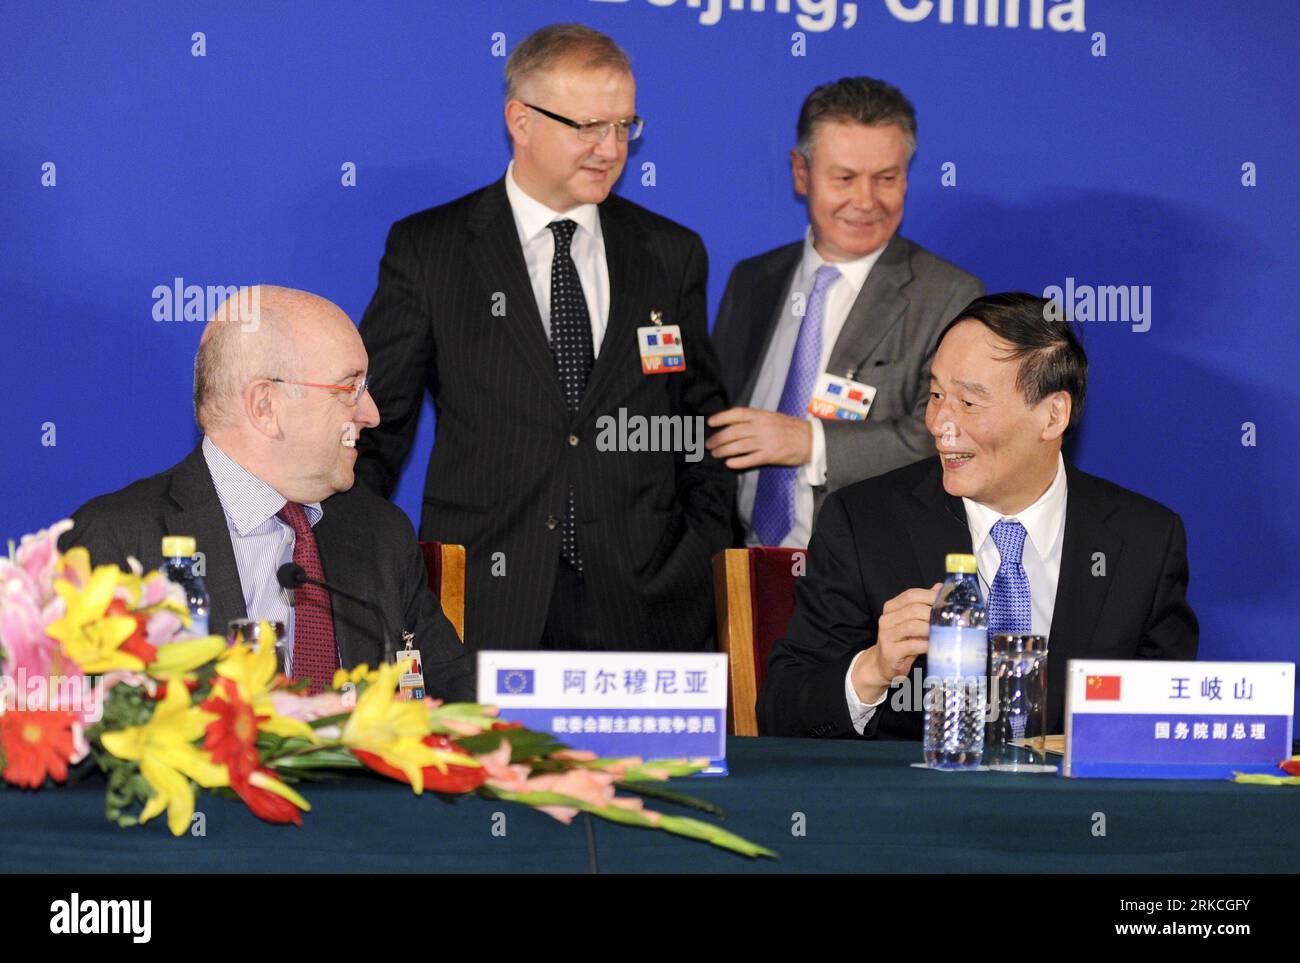 Bildnummer: 54764375  Datum: 21.12.2010  Copyright: imago/Xinhua (101221) -- BEIJING, Dec. 21, 2010 (Xinhua) -- Chinese Vice Premier Wang Qishan (R front), European Commission Vice President in charge of competition policy Joaquin Almunia (L front), Trade Commissioner Karel De Gucht (R back) and Commissioner for Economic and Monetary Affairs Olli Rehn, attend the press conference on the Third China-EU High Level Economic and Trade Dialogue in Beijing, capital of China, Dec. 21, 2010. (Xinhua/Xie Huanchi) (wyo) CHINA-EU HIGH LEVEL ECONOMIC AND TRADE DIALOGUE-PRESS CONFERENCE (CN) PUBLICATIONxNO Stock Photo